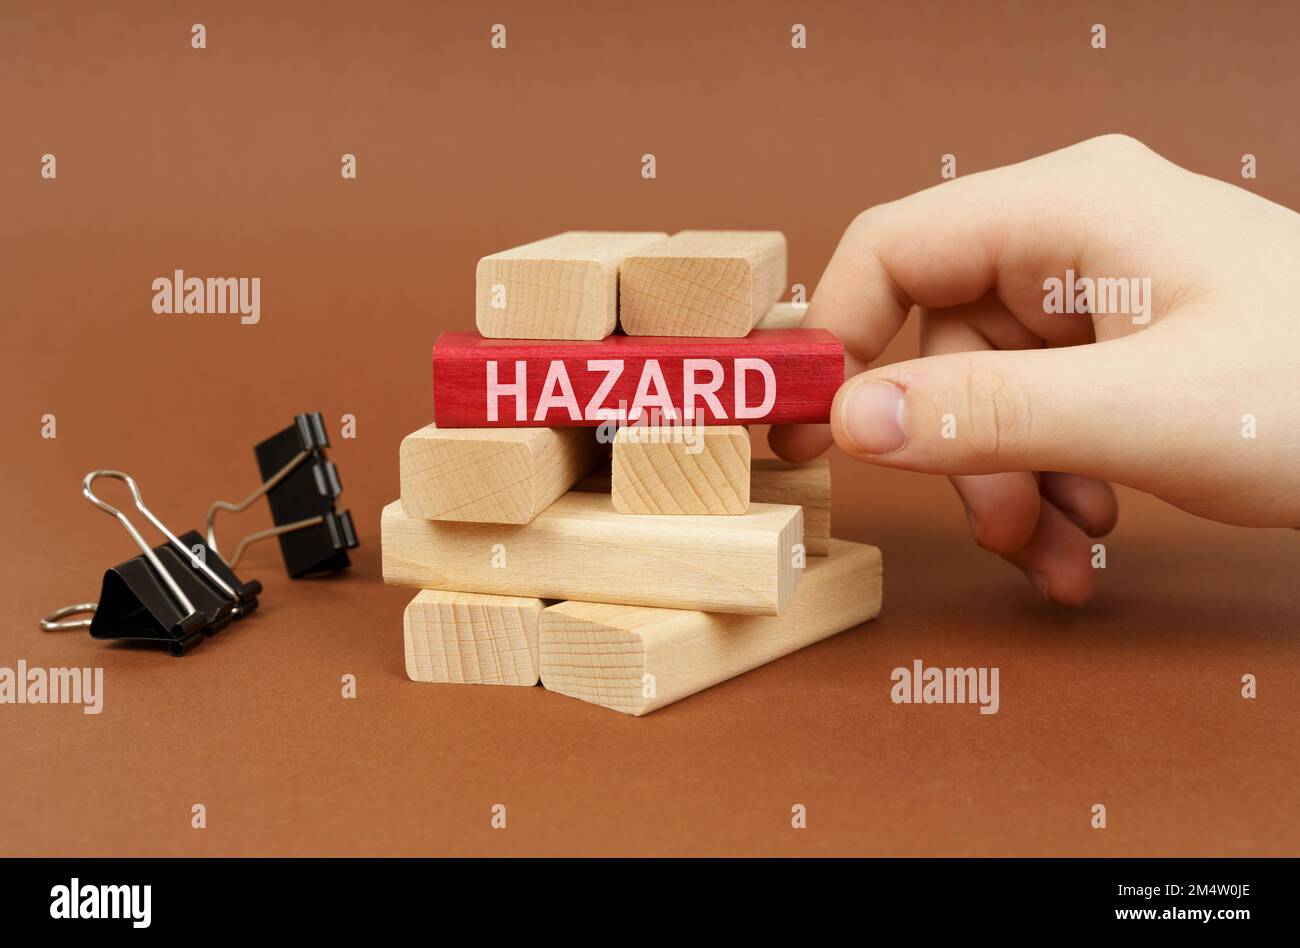 Industrial concept. Clamps and wooden blocks lie on a brown surface, a person takes out a red block with the inscription - danger Stock Photo